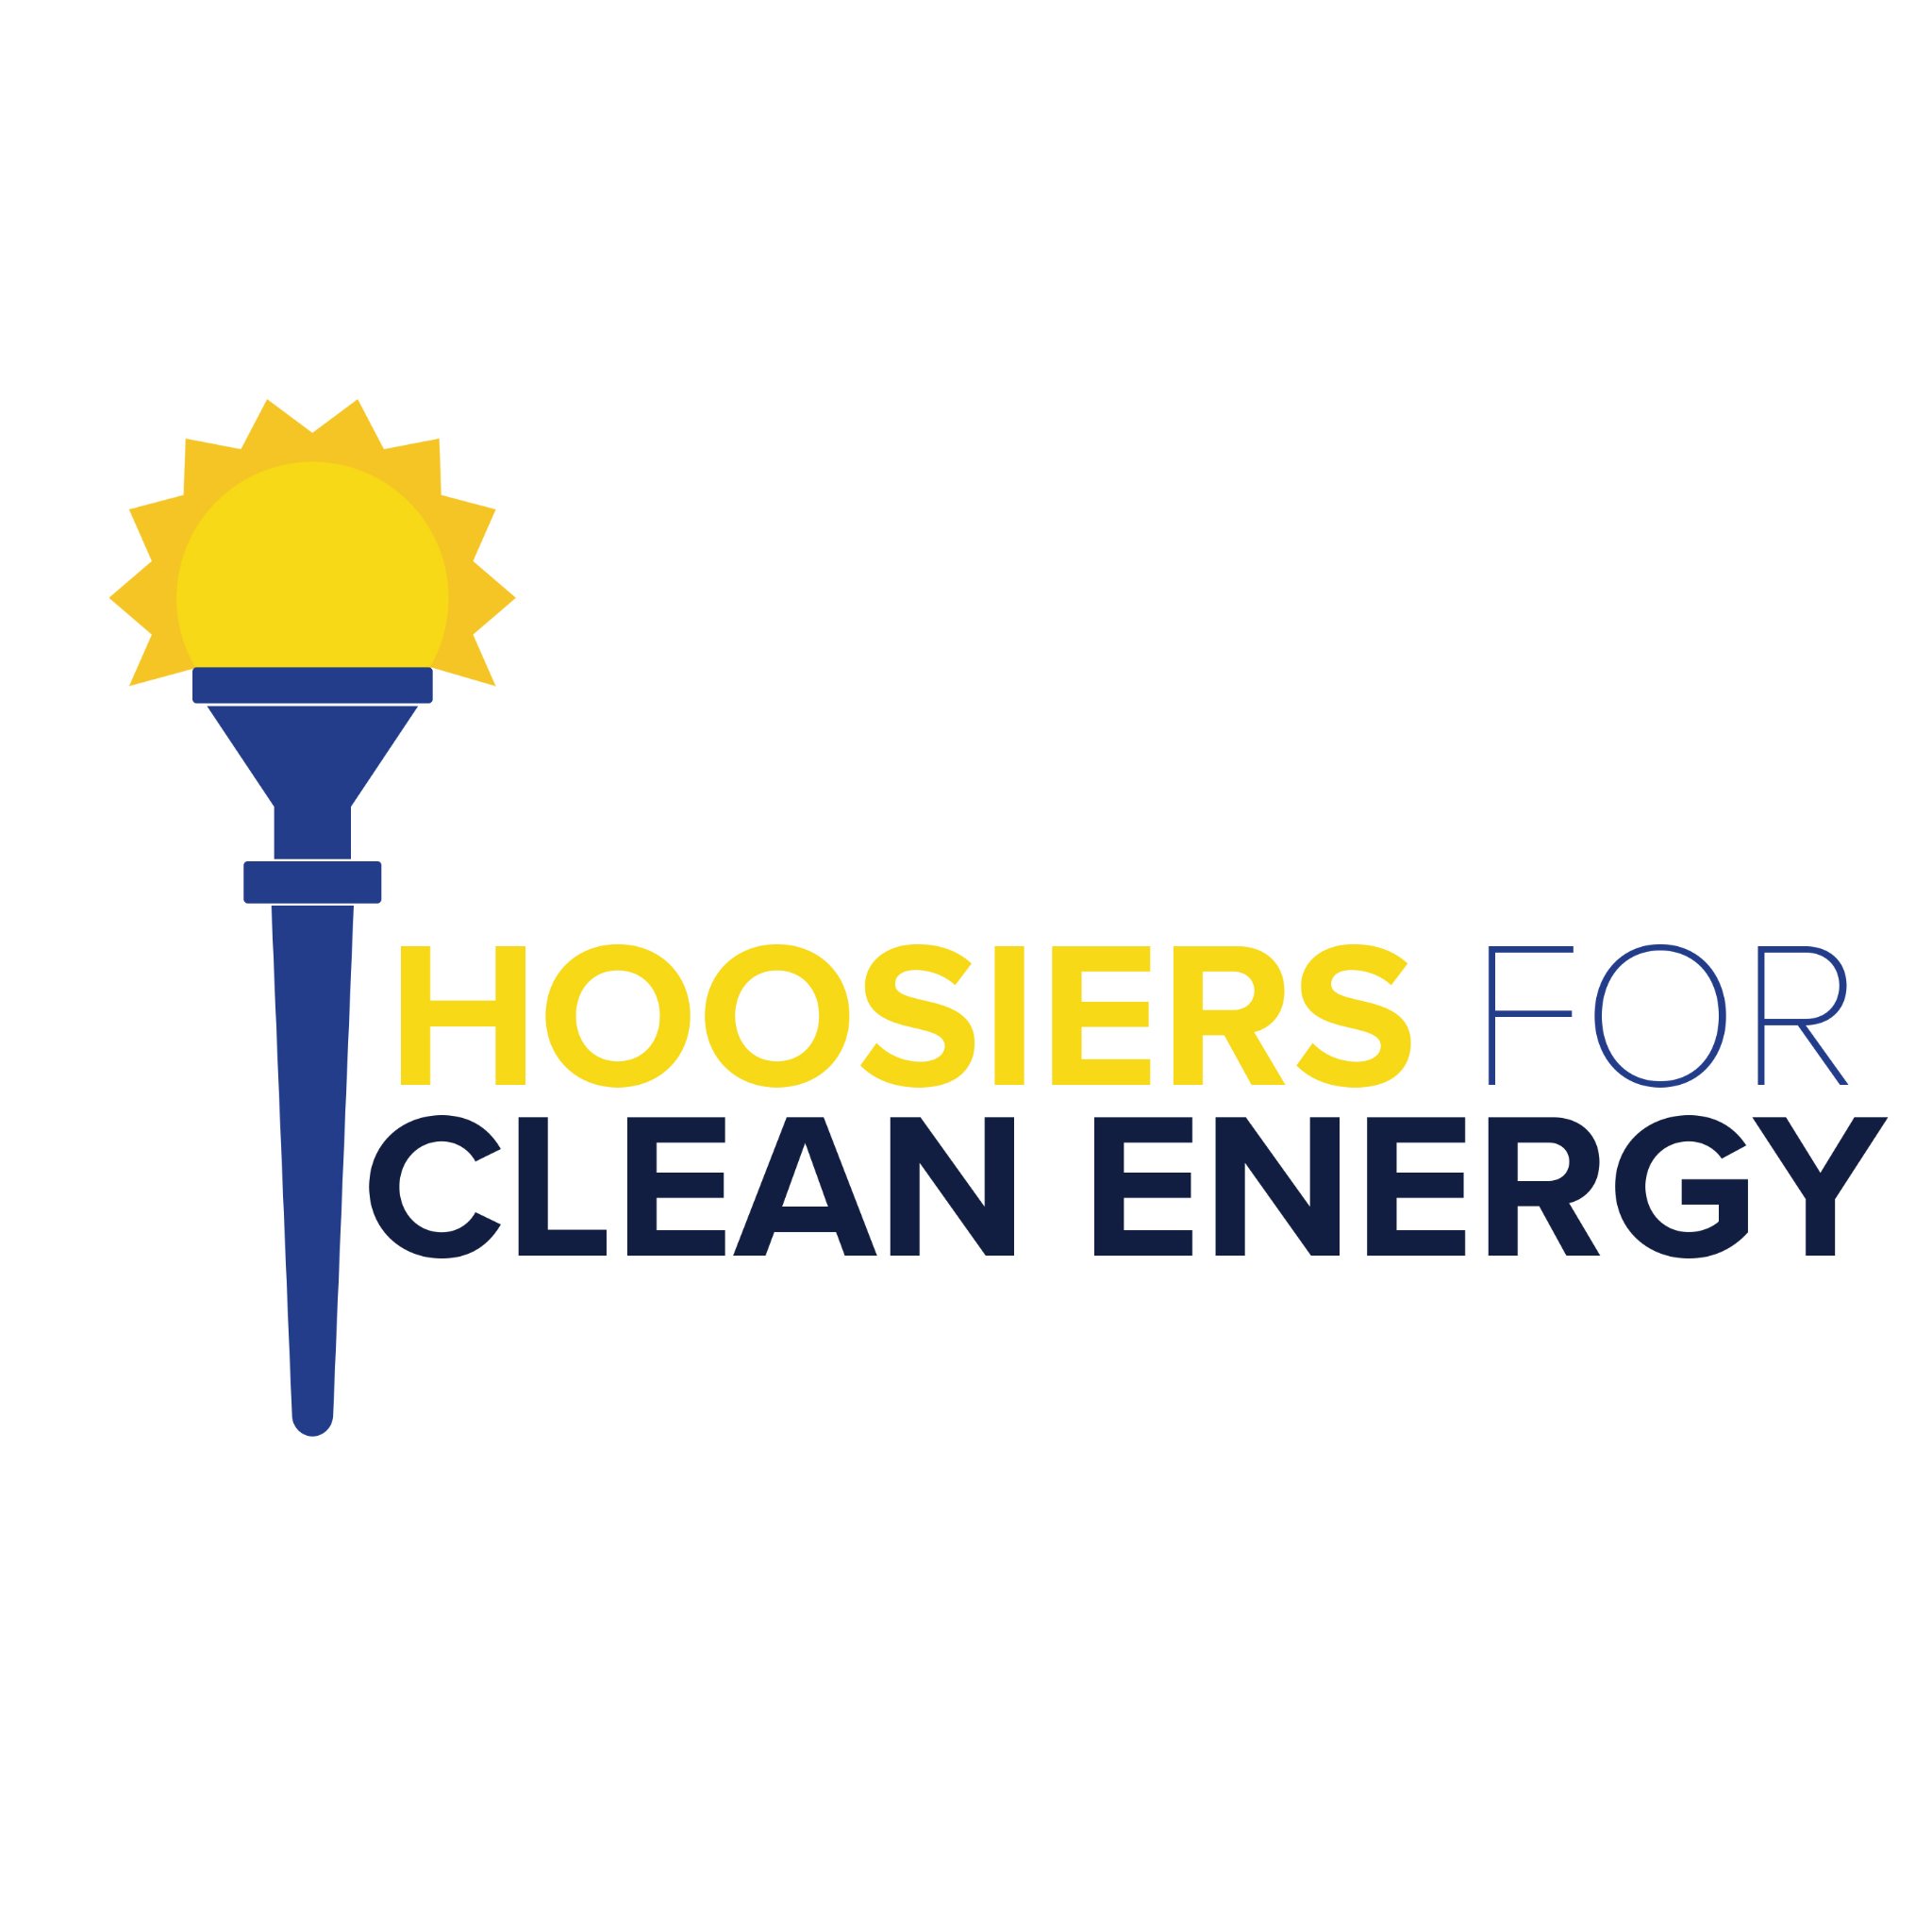 The latest news about clean energy policies and projects in Indiana.